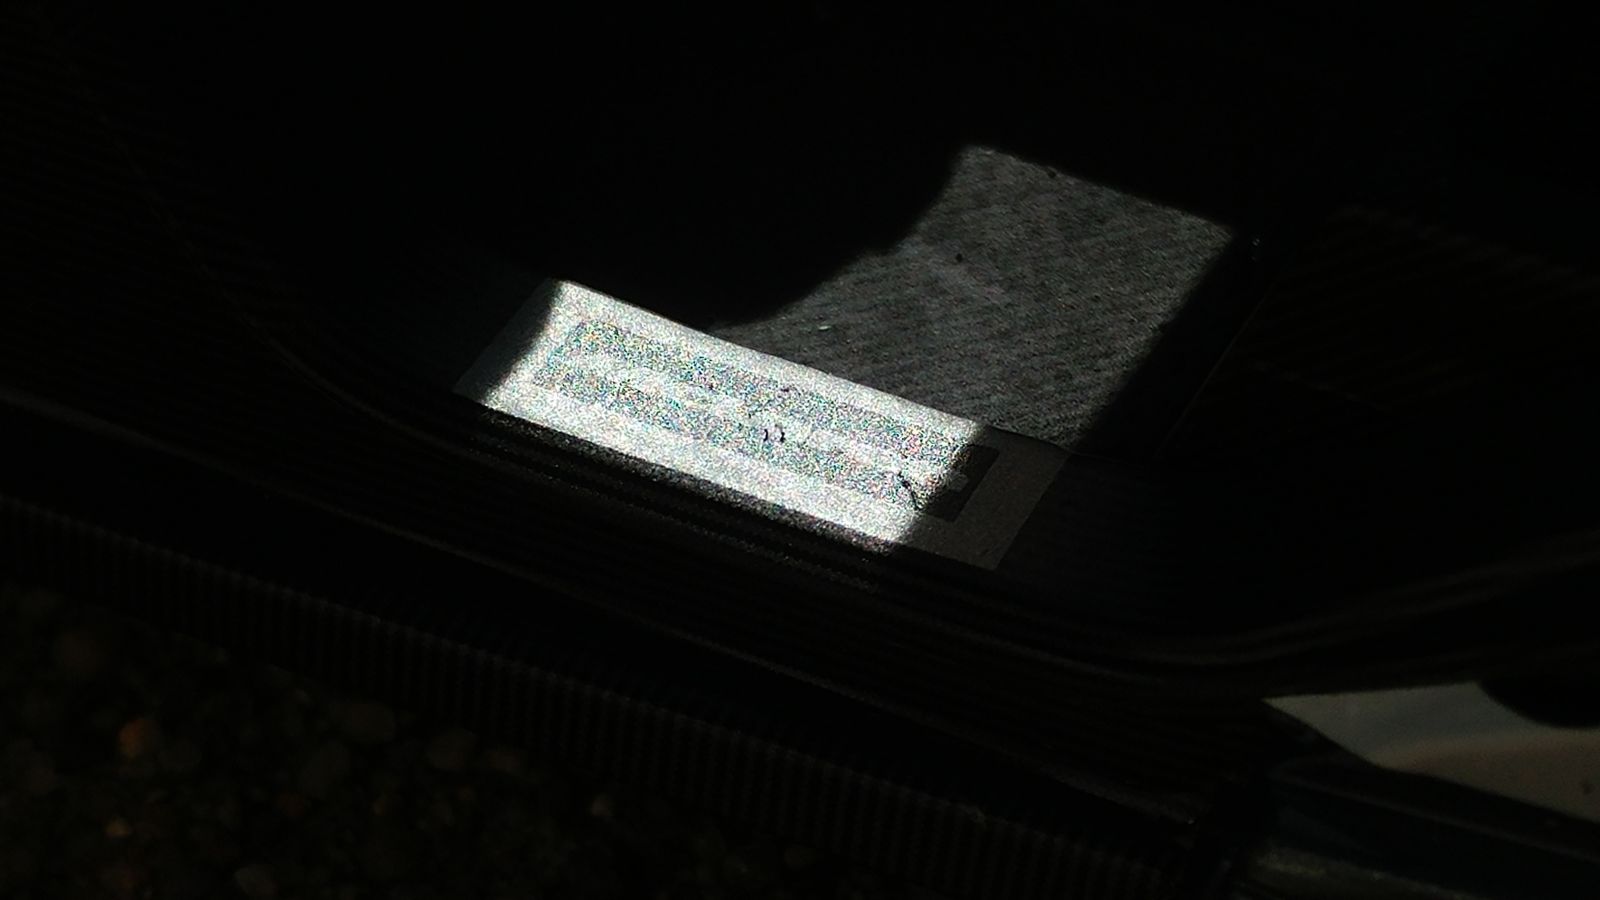 It’s hard to read, but the doorsill does say McLaren. Sun was a tad bright...